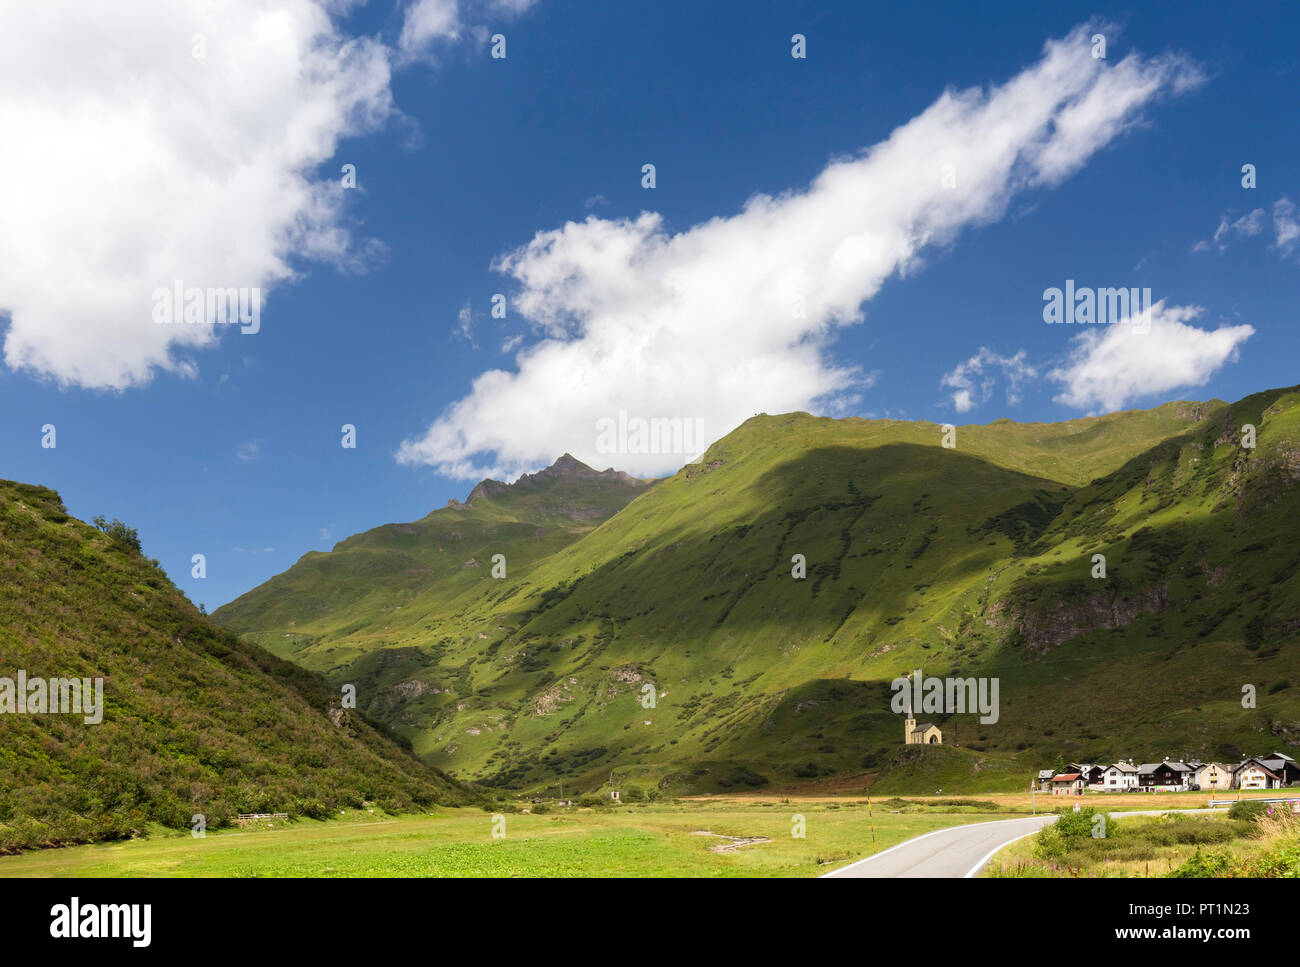 View of the church and town of Riale in summer, Formazza, Valle Formazza, Verbano Cusio Ossola, Piedmont, Italy, Stock Photo